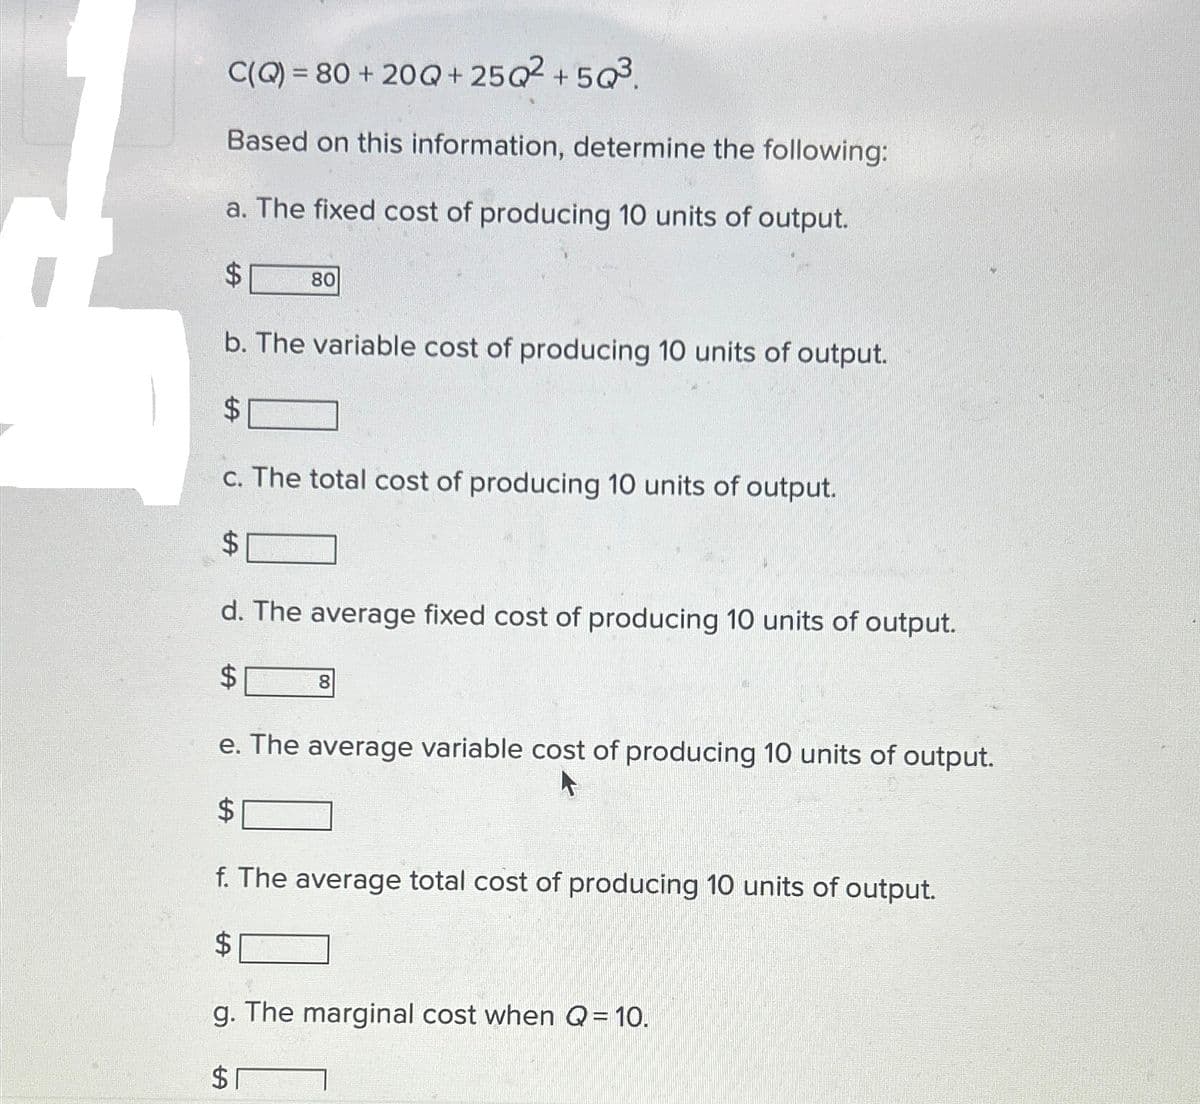 C(Q) = 80+
Based on this information, determine the following:
a. The fixed cost of producing 10 units of output.
$ 80
b. The variable cost of producing 10 units of output.
$
c. The total cost of producing 10 units of output.
$
20Q+25Q²+5Q³.
d. The average fixed cost of producing 10 units of output.
$
8
e. The average variable cost of producing 10 units of output.
$
f. The average total cost of producing 10 units of output.
$
g. The marginal cost when Q = 10.
$1